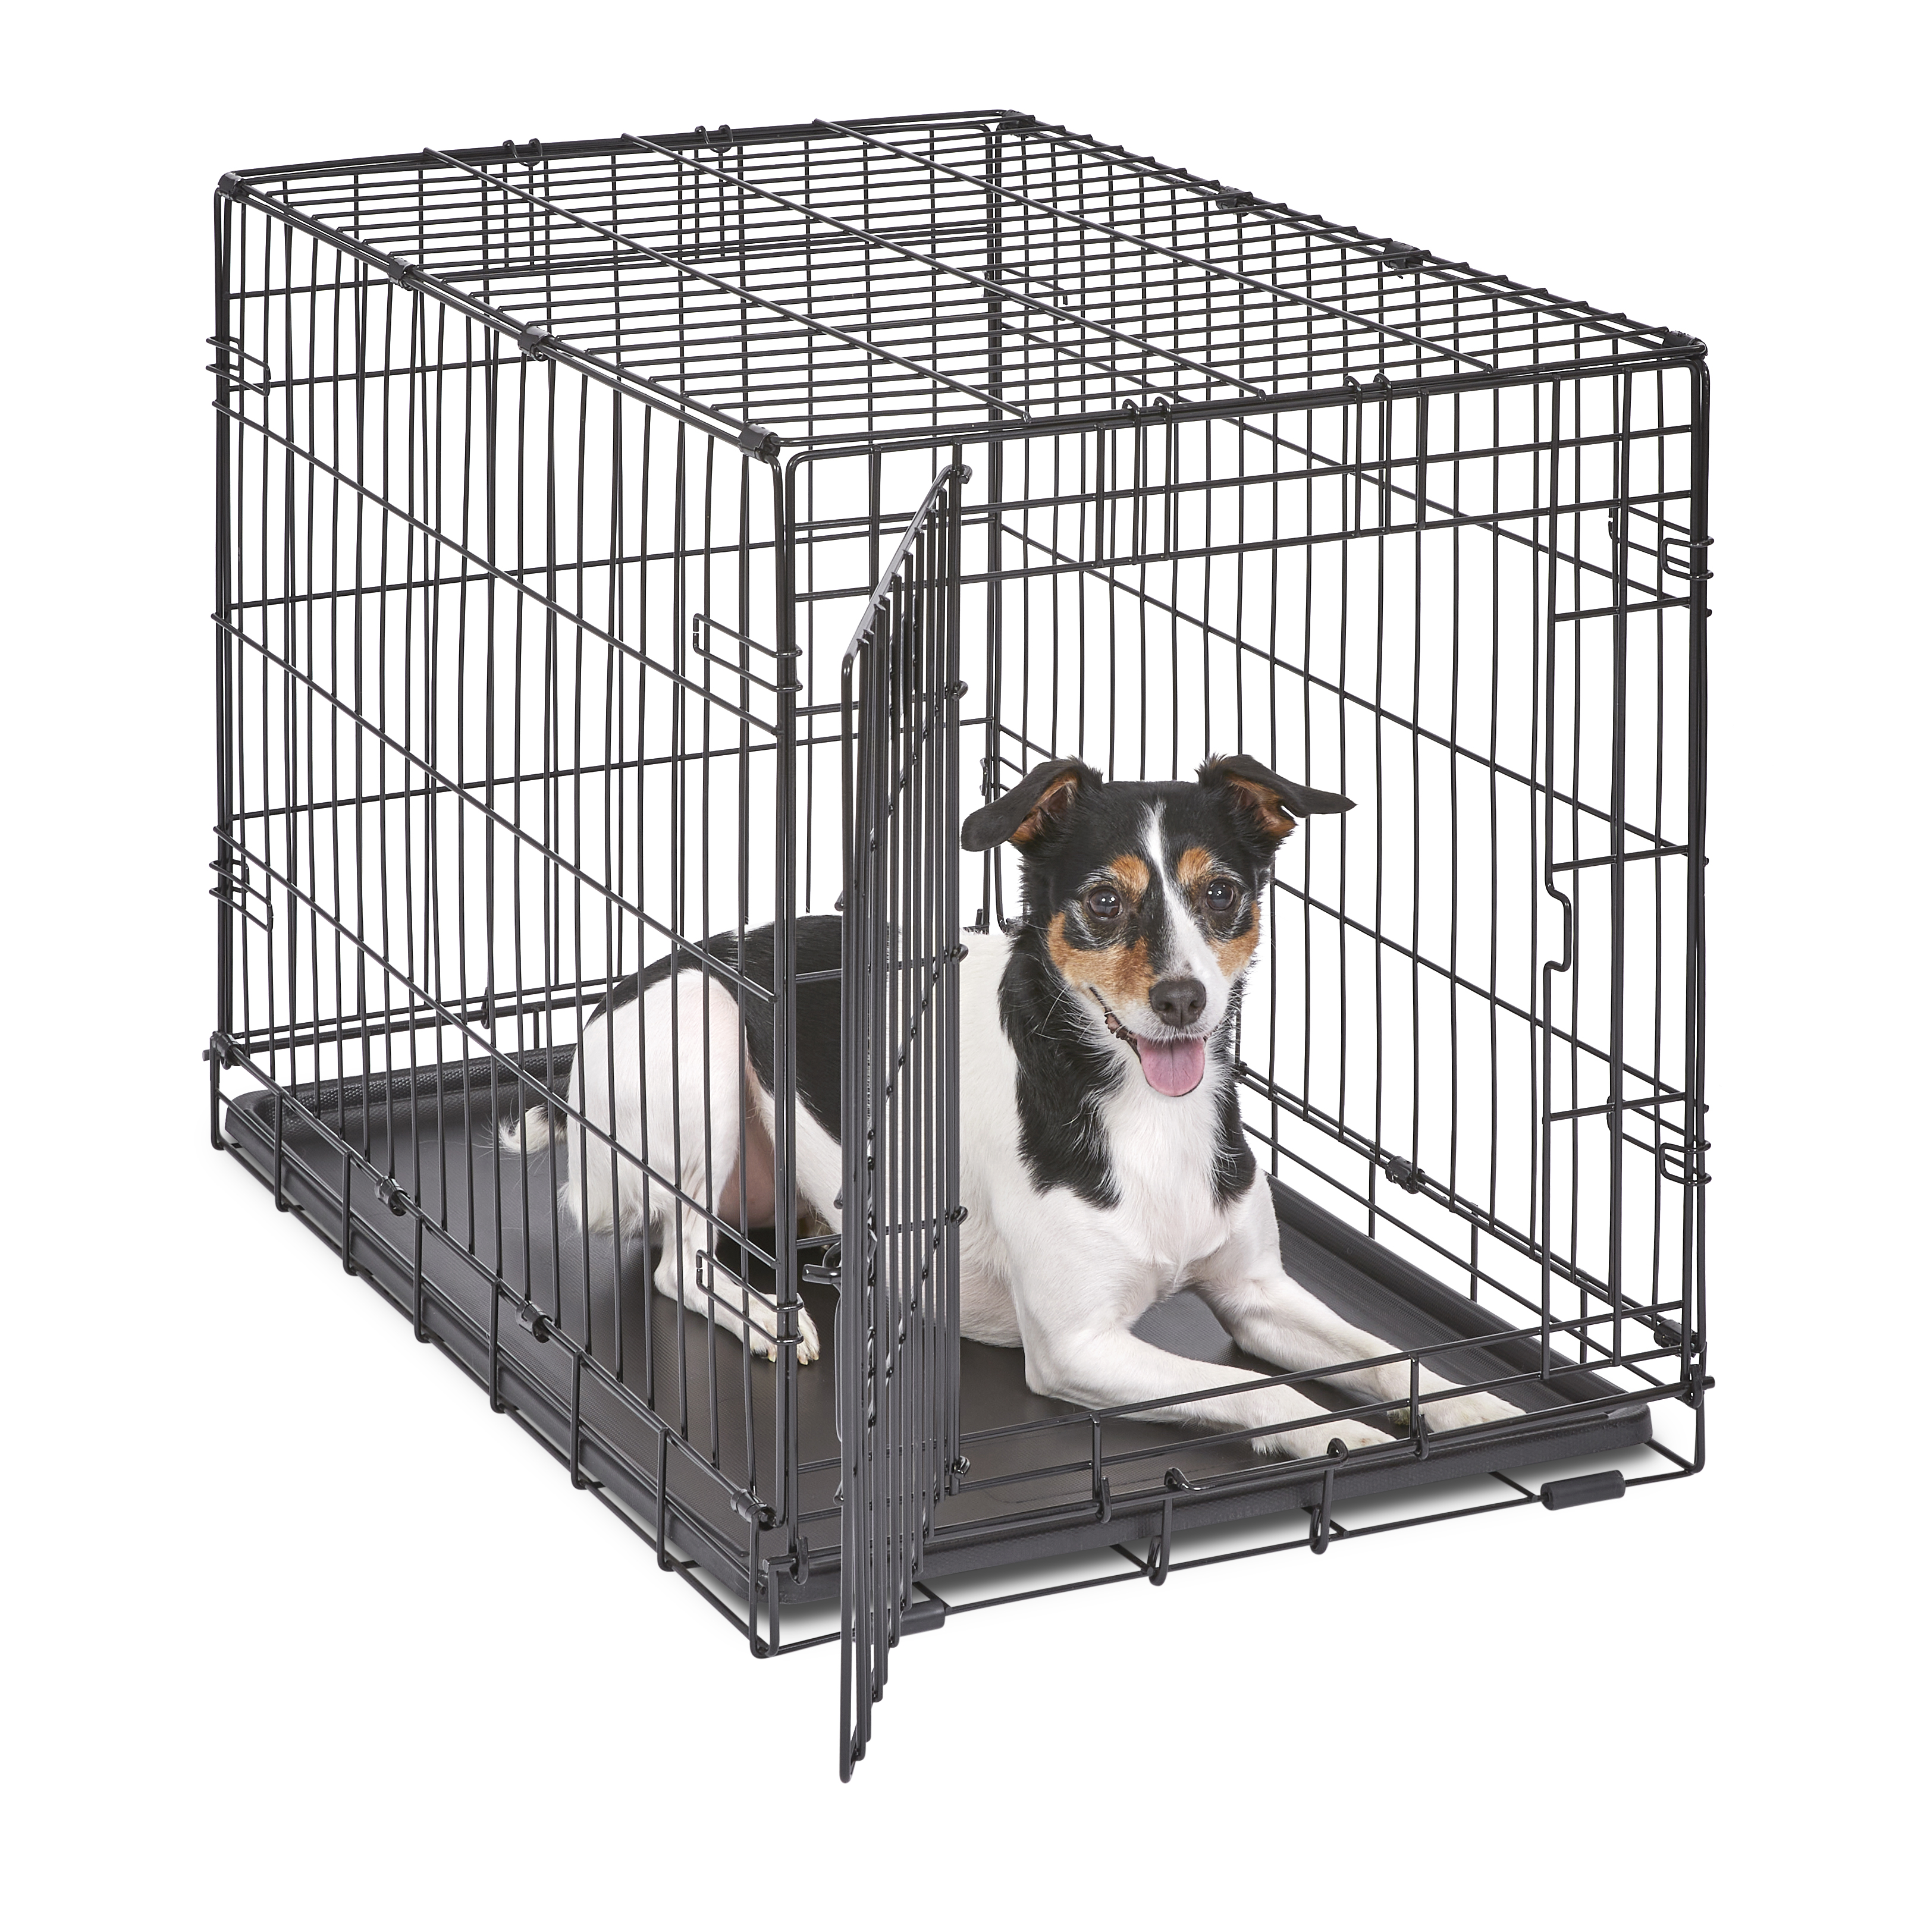 MidWest Homes For Pets Single Door iCrate Metal Dog Crate, 30" - image 2 of 8